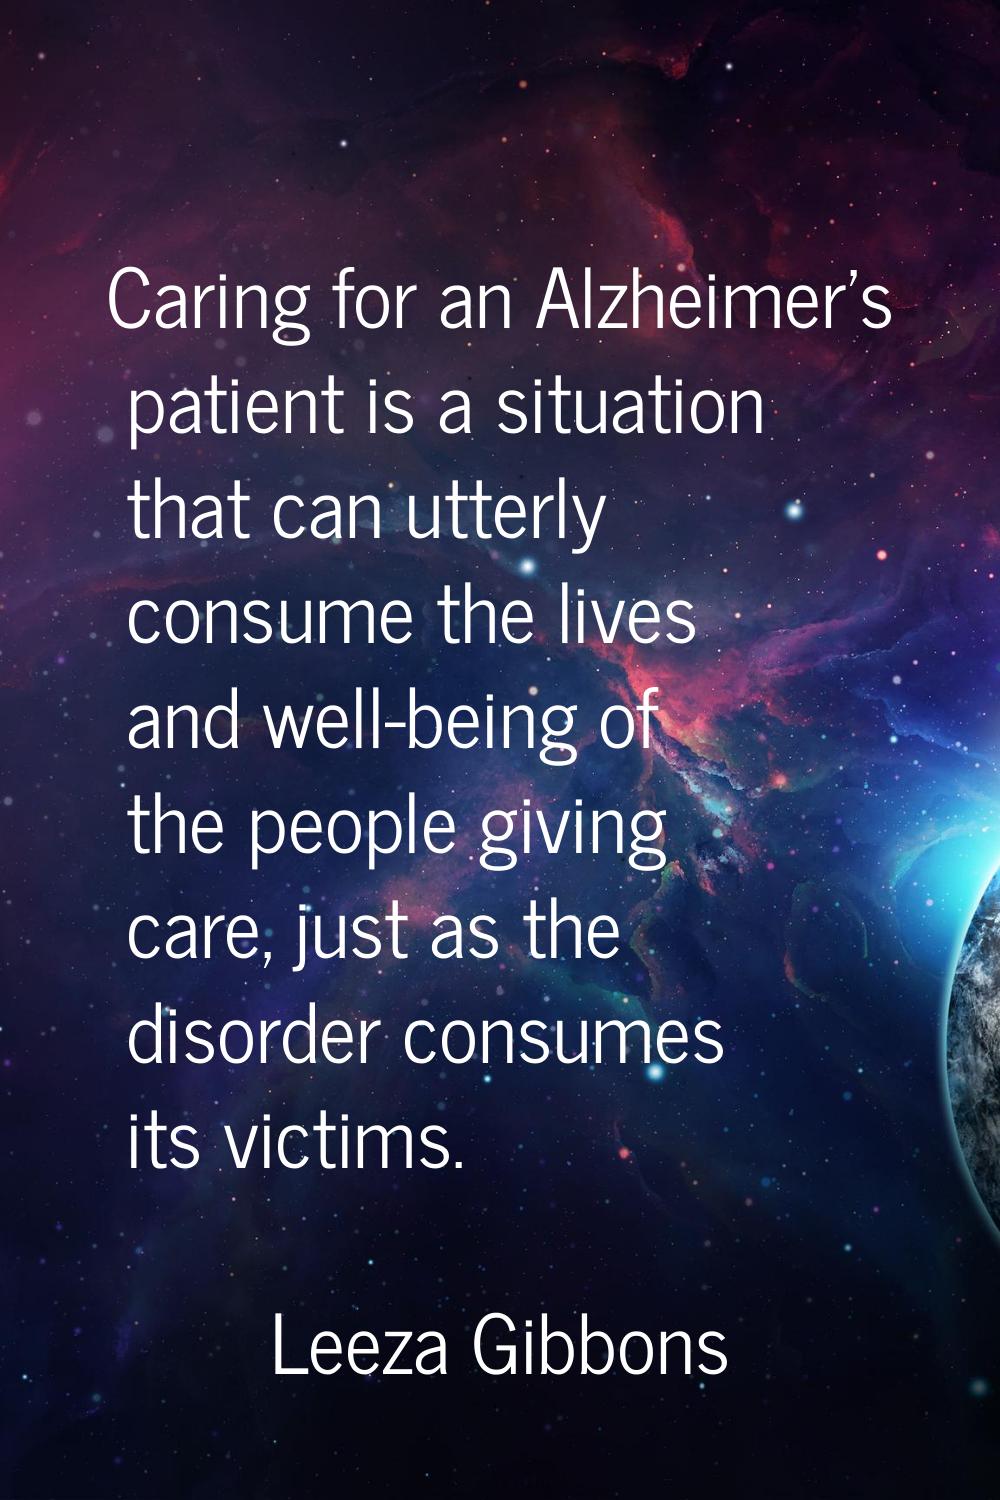 Caring for an Alzheimer's patient is a situation that can utterly consume the lives and well-being 